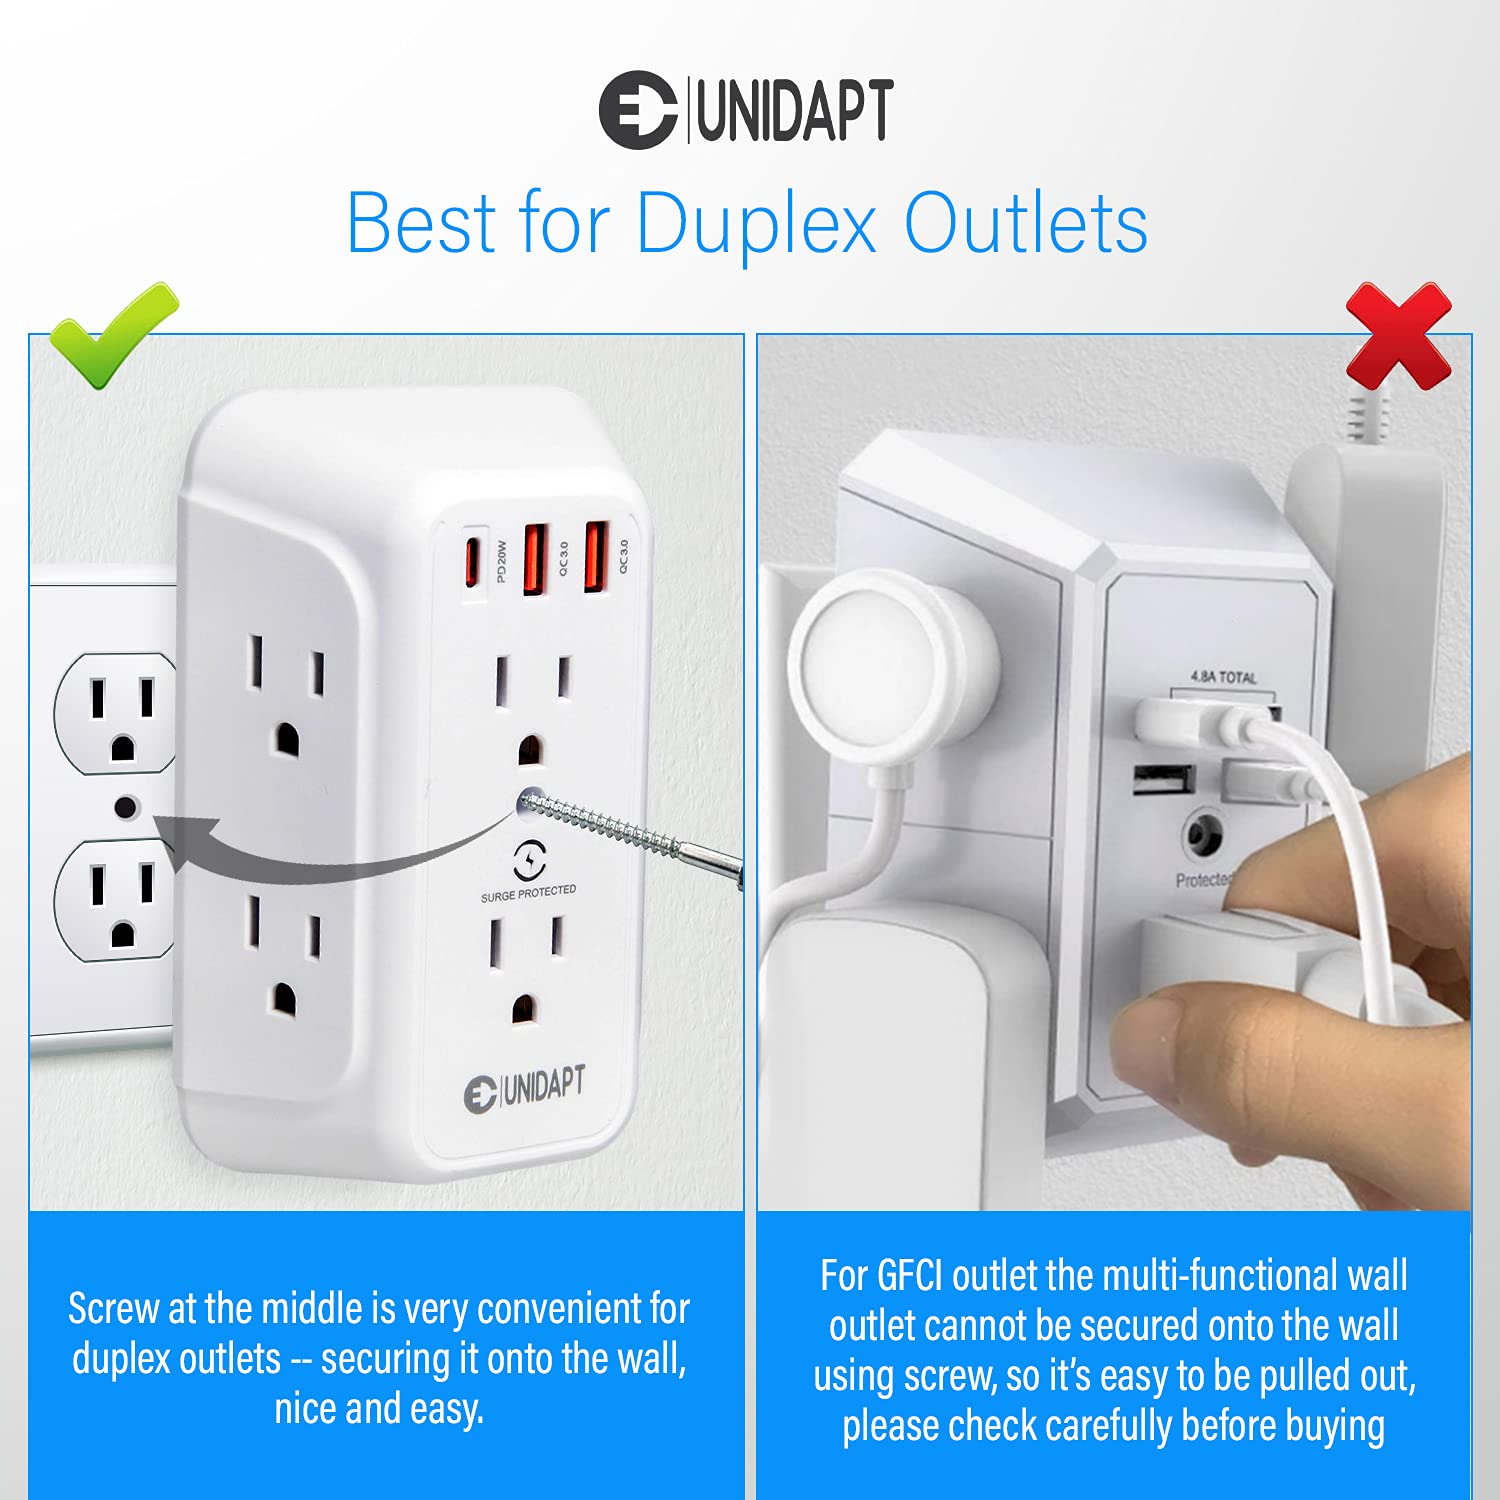 20W Multiple Plug Outlet, Unidapt 6 Way Surge Protector Outlet, 6 AC and 3 USB Ports, (1 USB C, 20W PD, 2 USB A QC 3.0) USB Wall Charger, 1800J Power Strip, Multi Plug Outlet with USB Ports ETL Listed